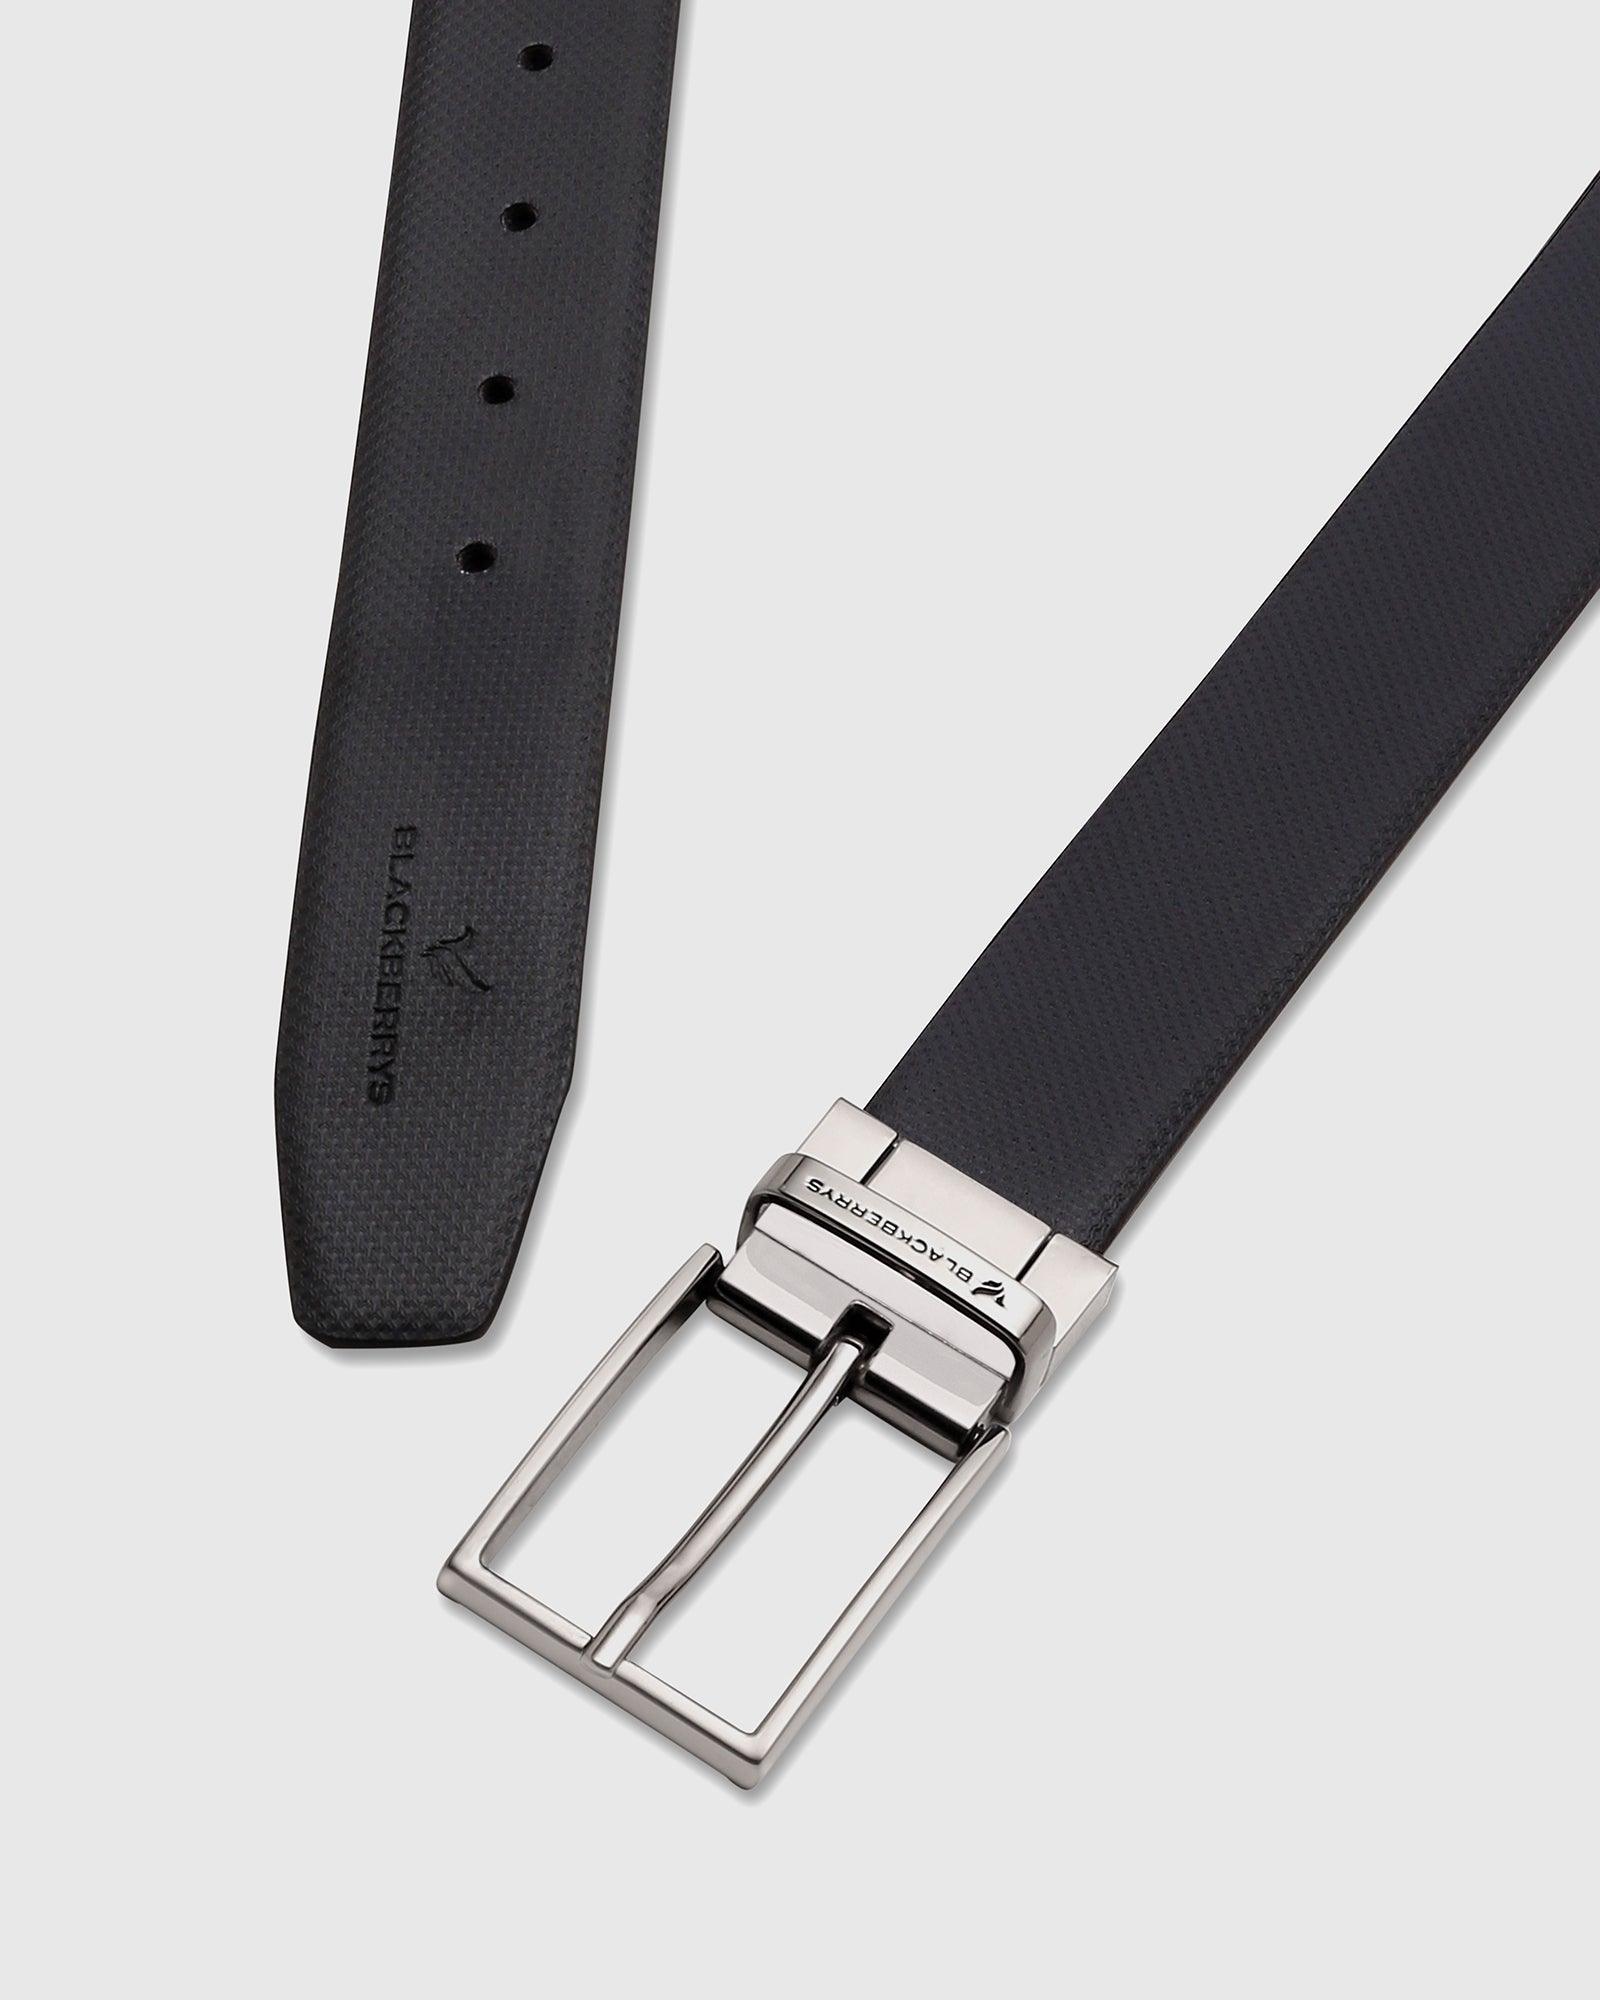 Leather Reversible Black Brown Textured Belt - Solo